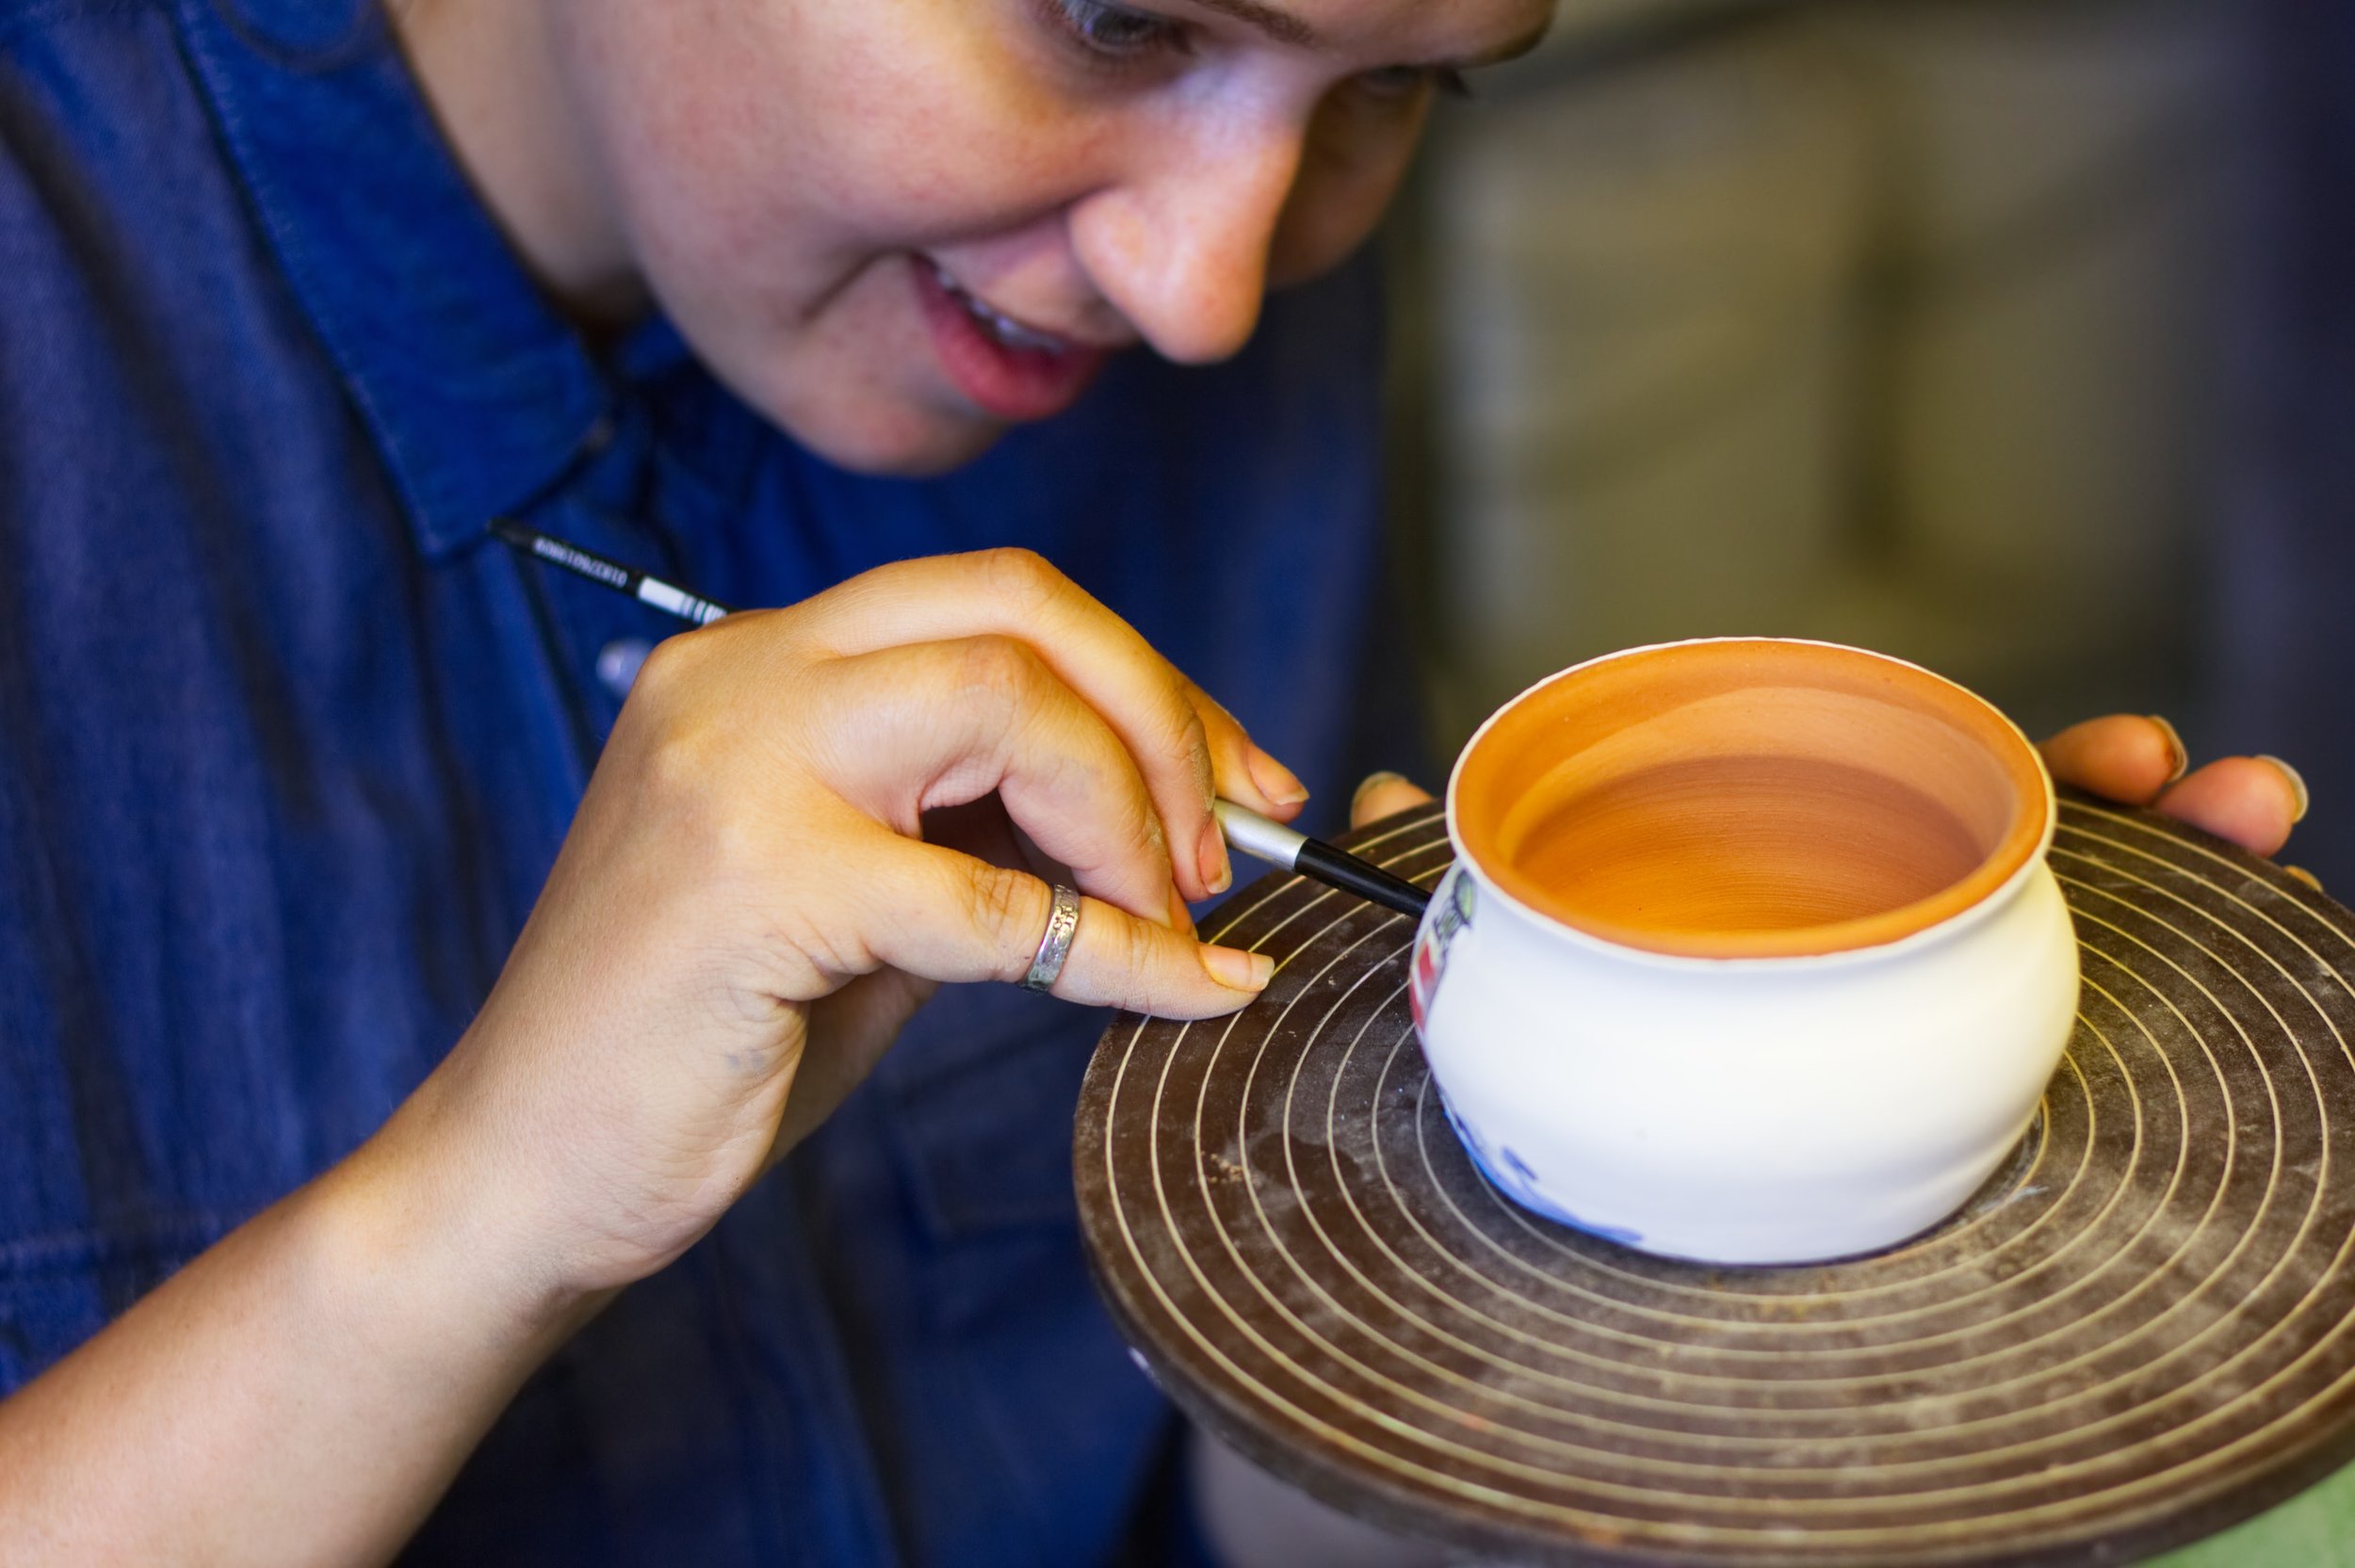 person painting pottery.jpg